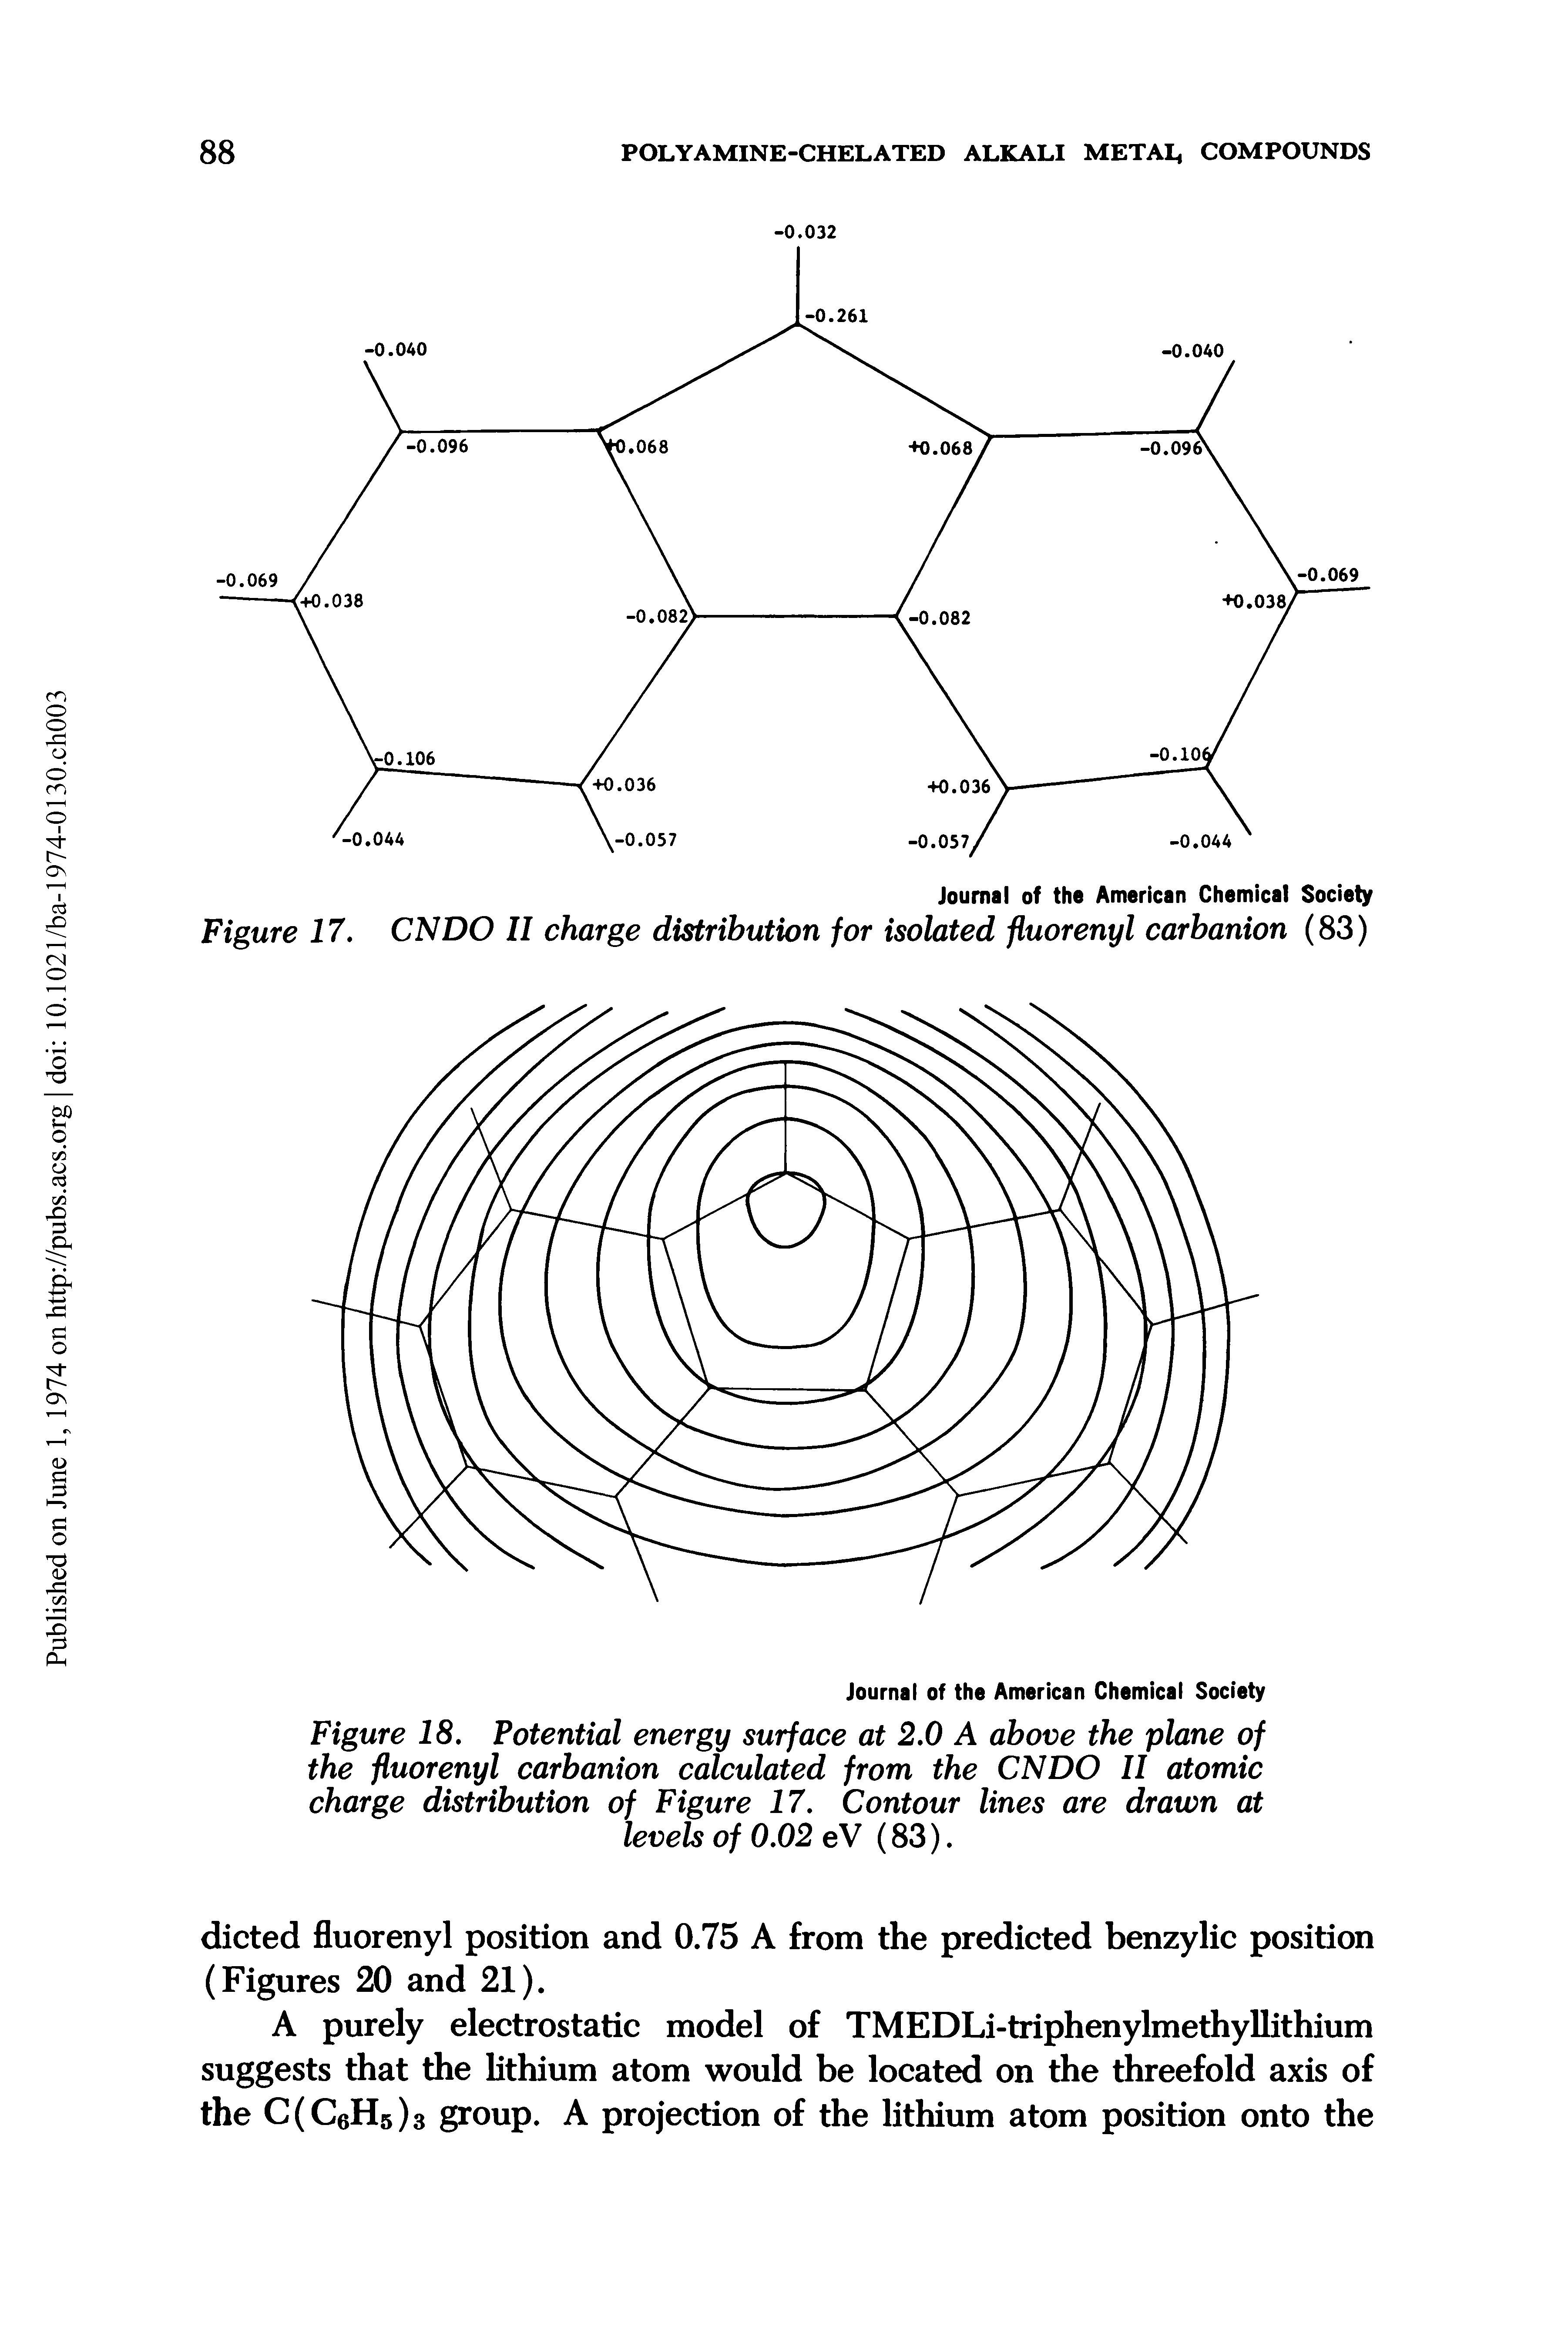 Figure 18. Potential energy surface at 2.0 A above the plane of the fluorenyl carbanion calculated from the CNDO II atomic charge distribution of Figure 17. Contour lines are drawn at levels of 0.02 eV (83).